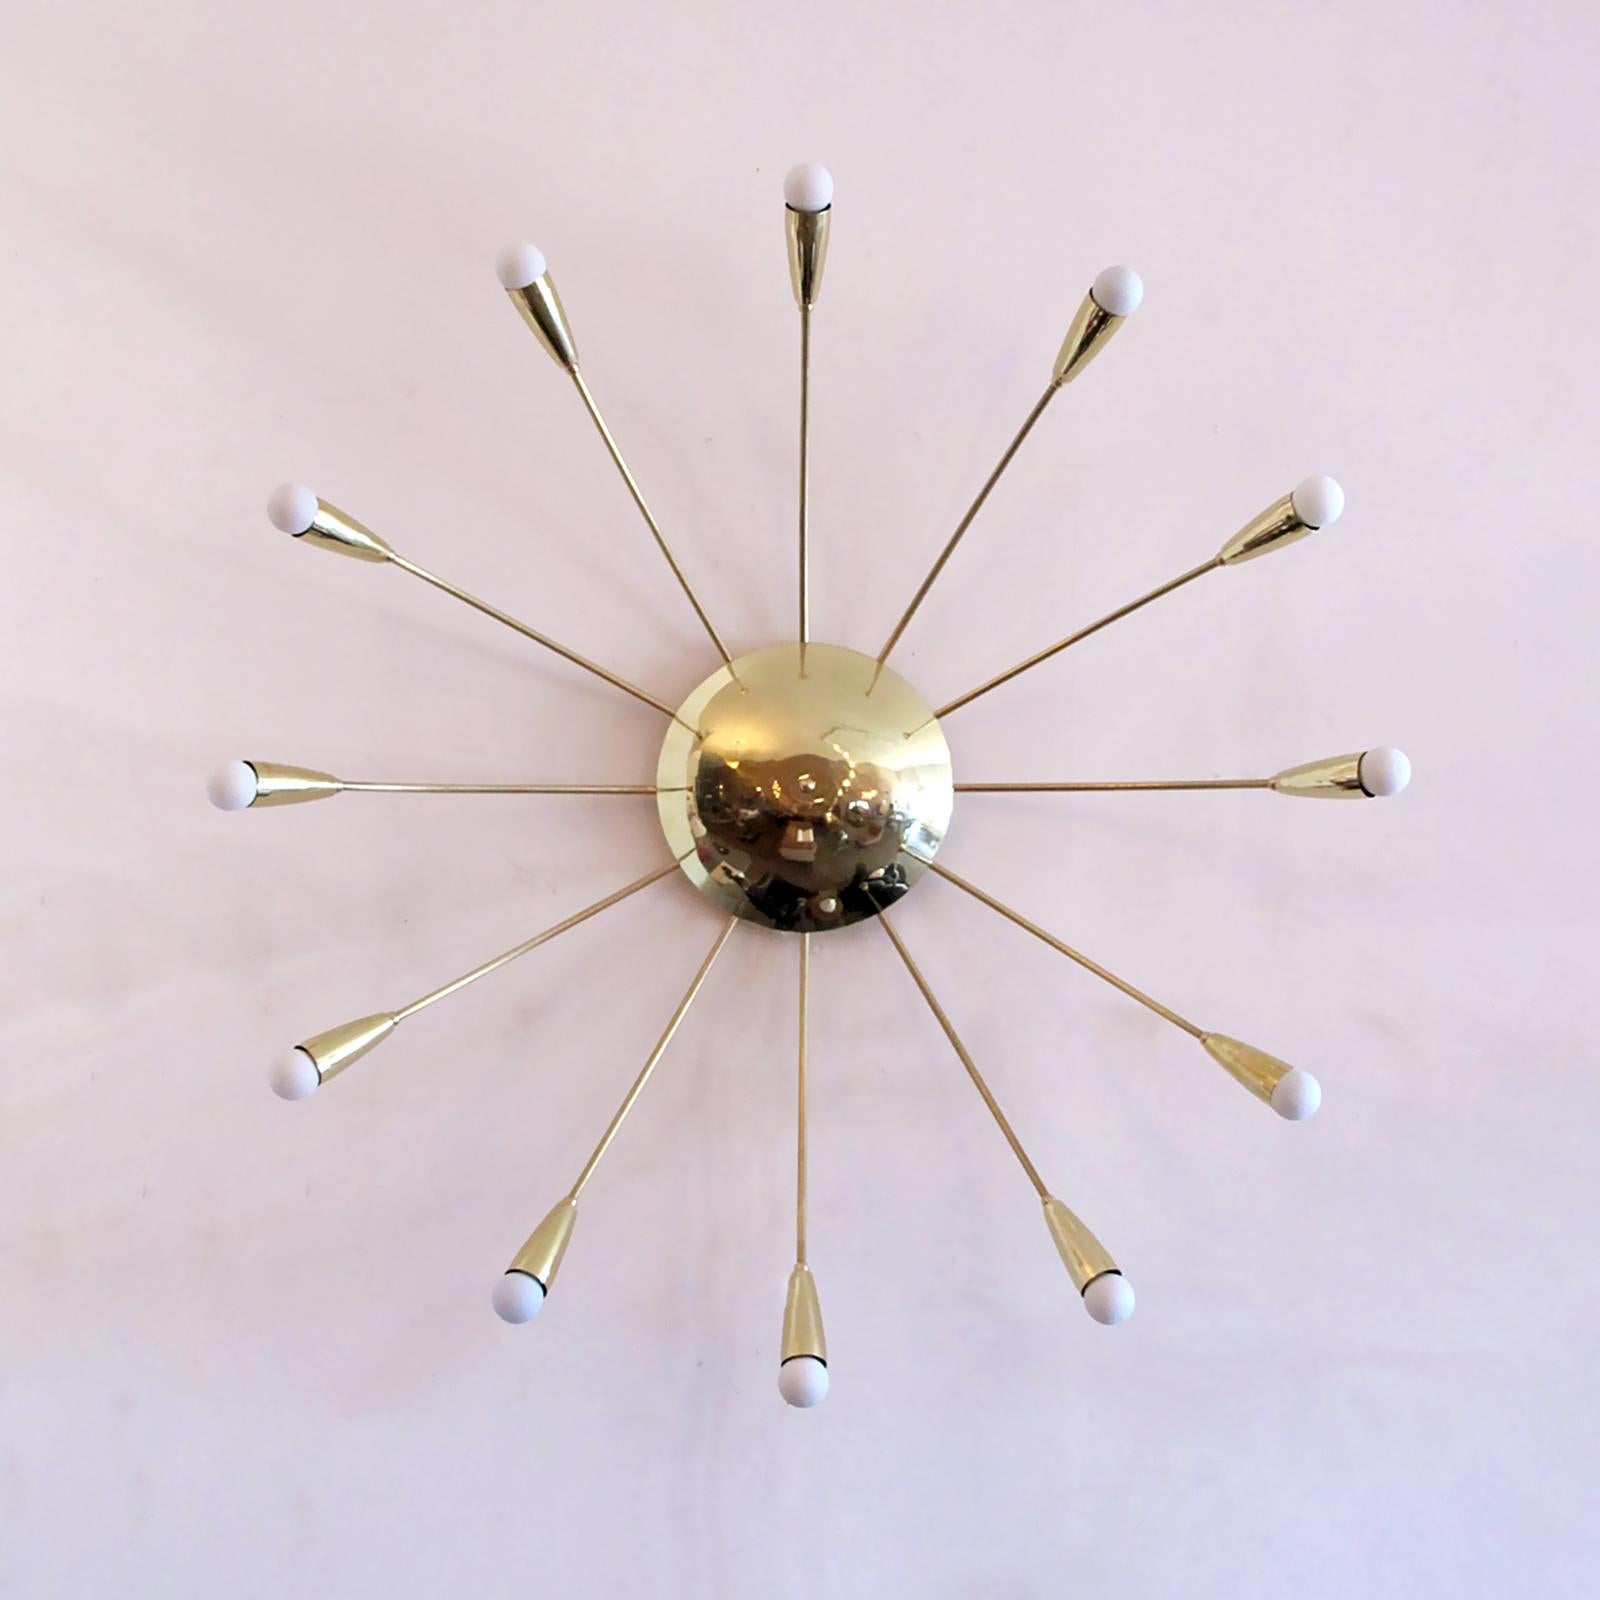 Elegant twelve light Aurora wall or ceiling light designed by Gallery L7, handcrafted and finished in Los Angeles from American brass. Twelve E12 sockets per fixture, max. wattage 25w each, wired for US standards or European standards (110v/220v),